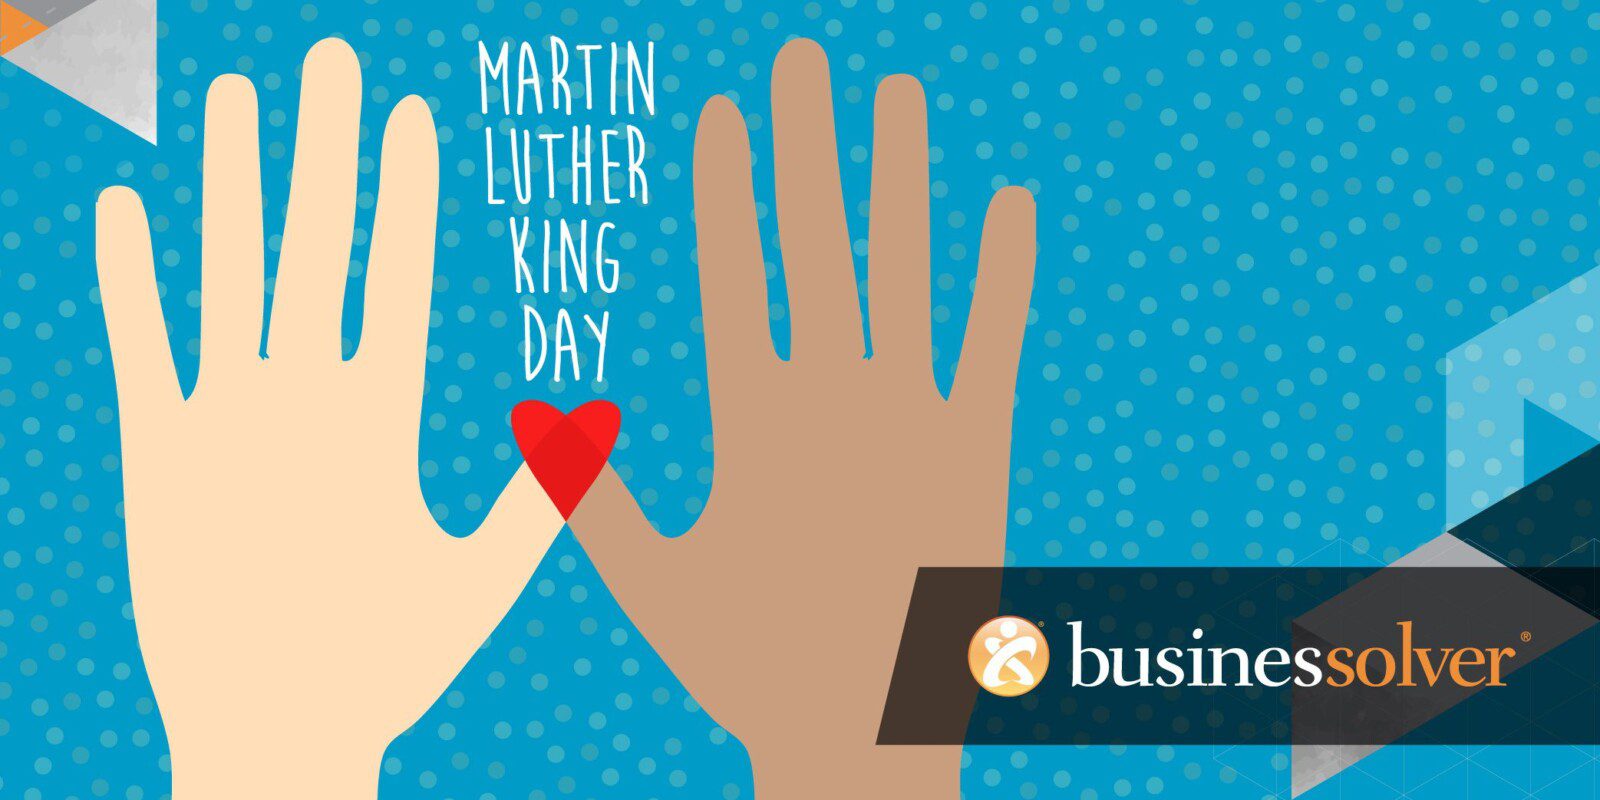 ‘Everyone Can Serve:’ How to Celebrate Service on MLK Day